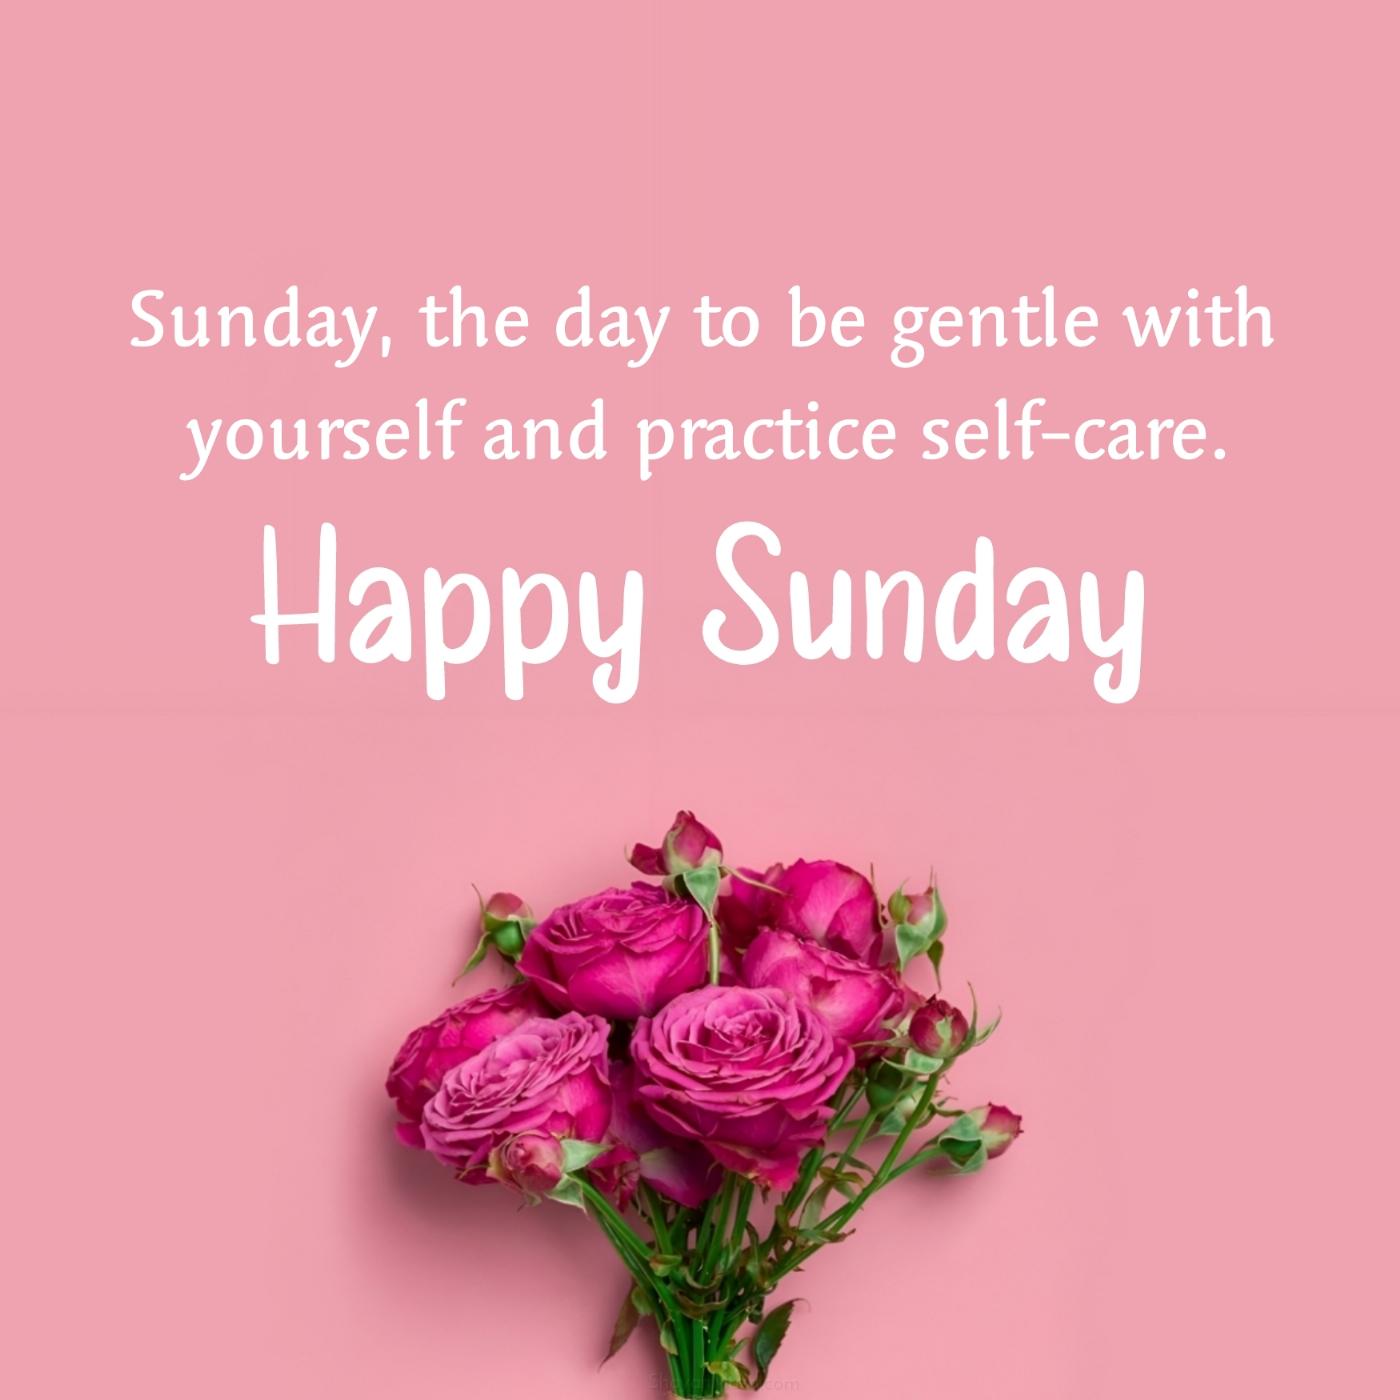 Sunday the day to be gentle with yourself and practice self-care